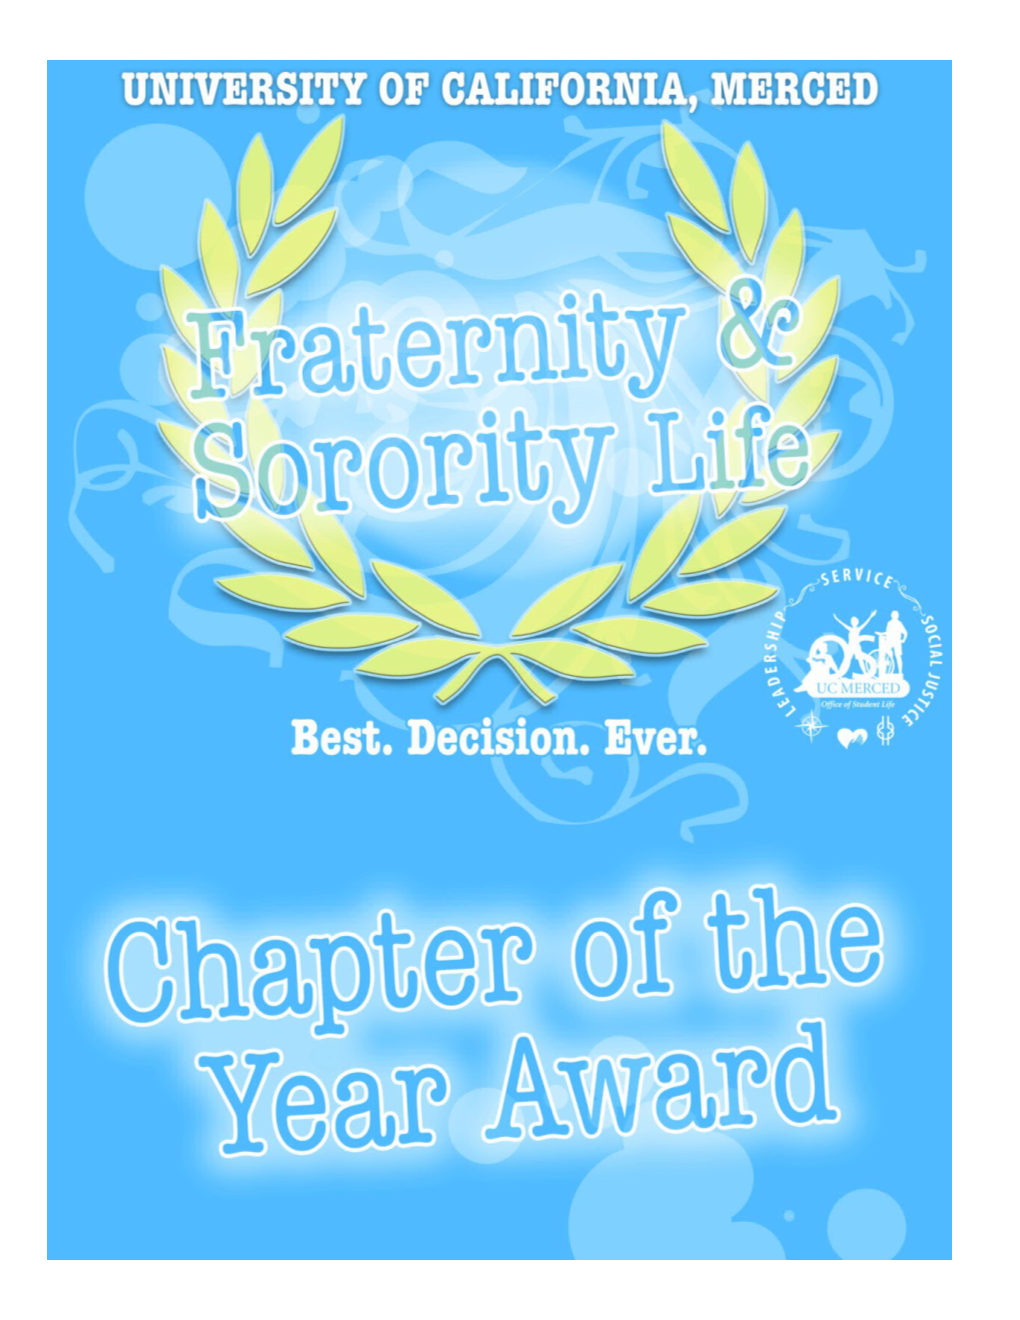 The Purpose of the Chapter of the Year Award Is To